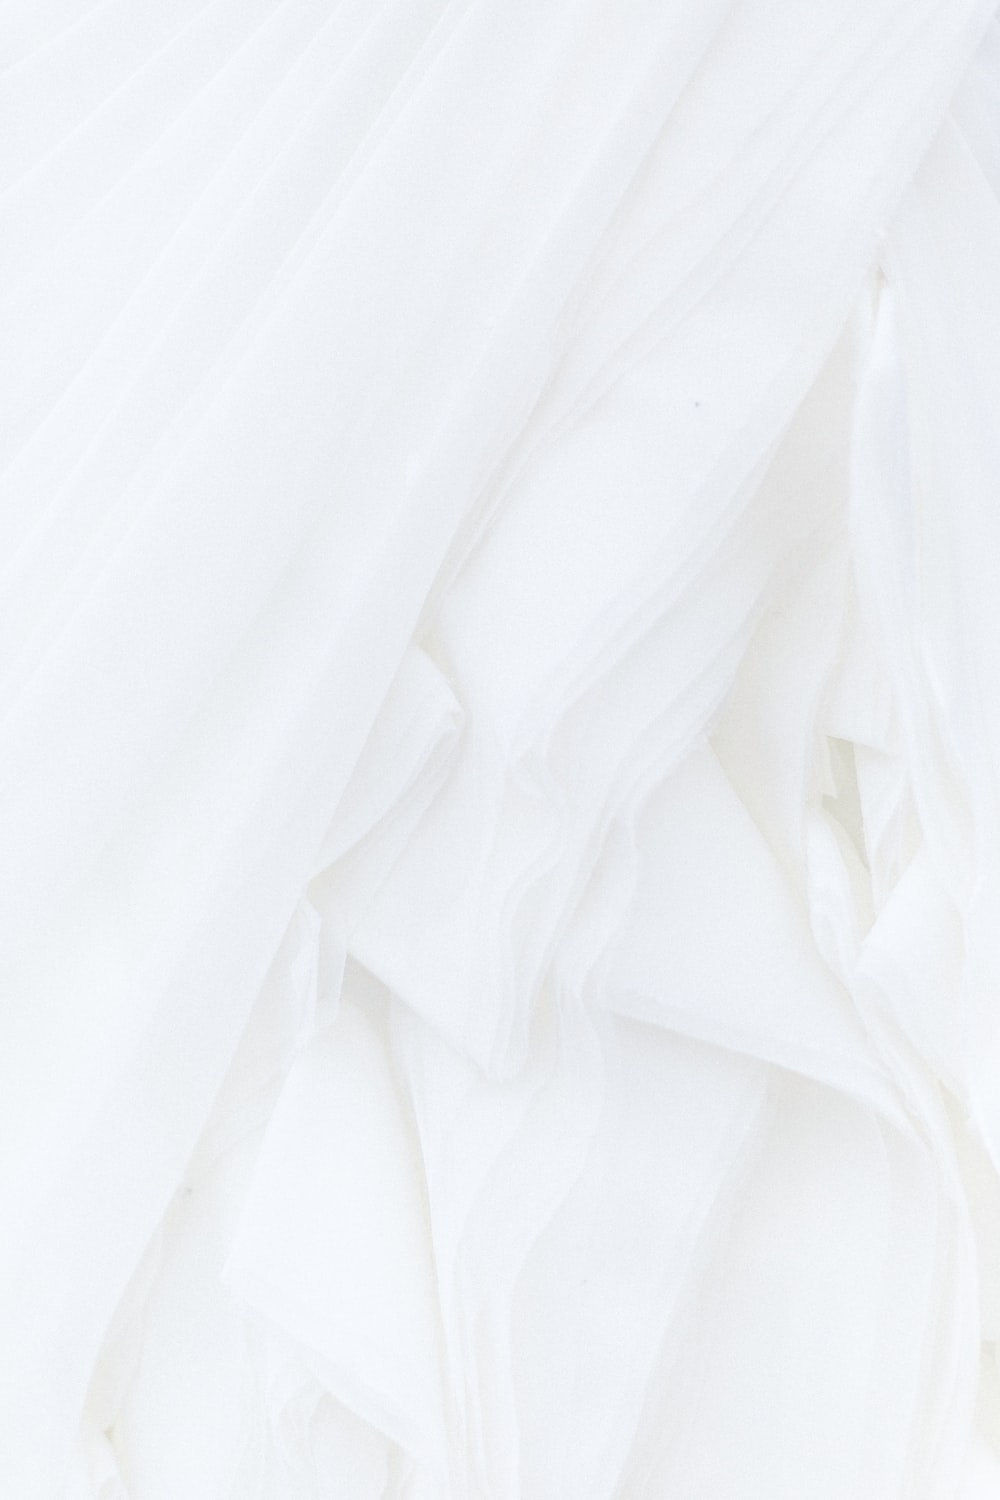 White Cloth Wallpapers - Wallpaper Cave